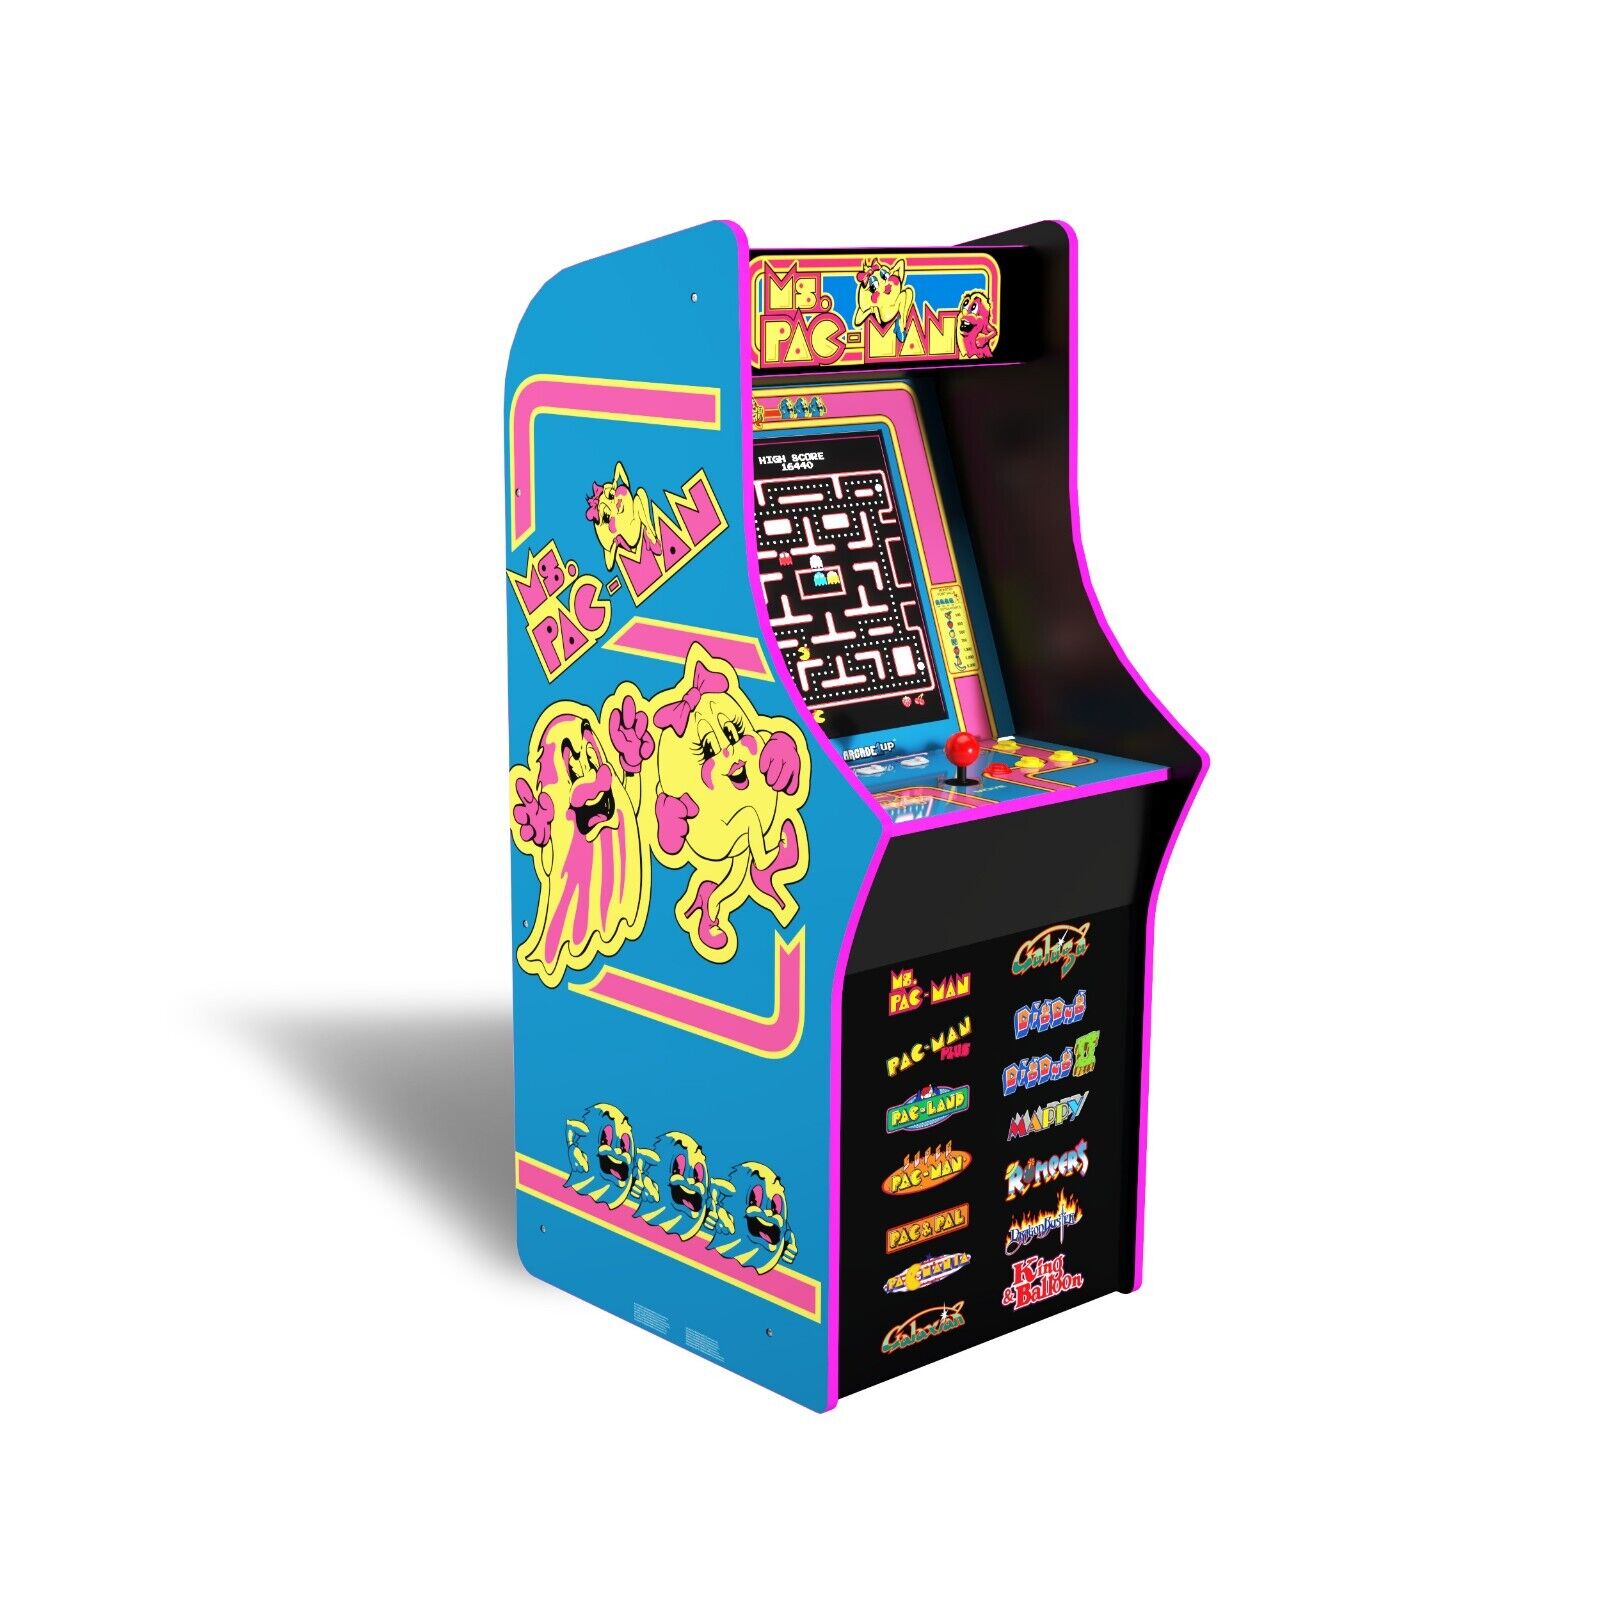 Arcade1Up Ms. PAC-MAN Classic Arcade Game, built for your home, 4-foot-tall stan